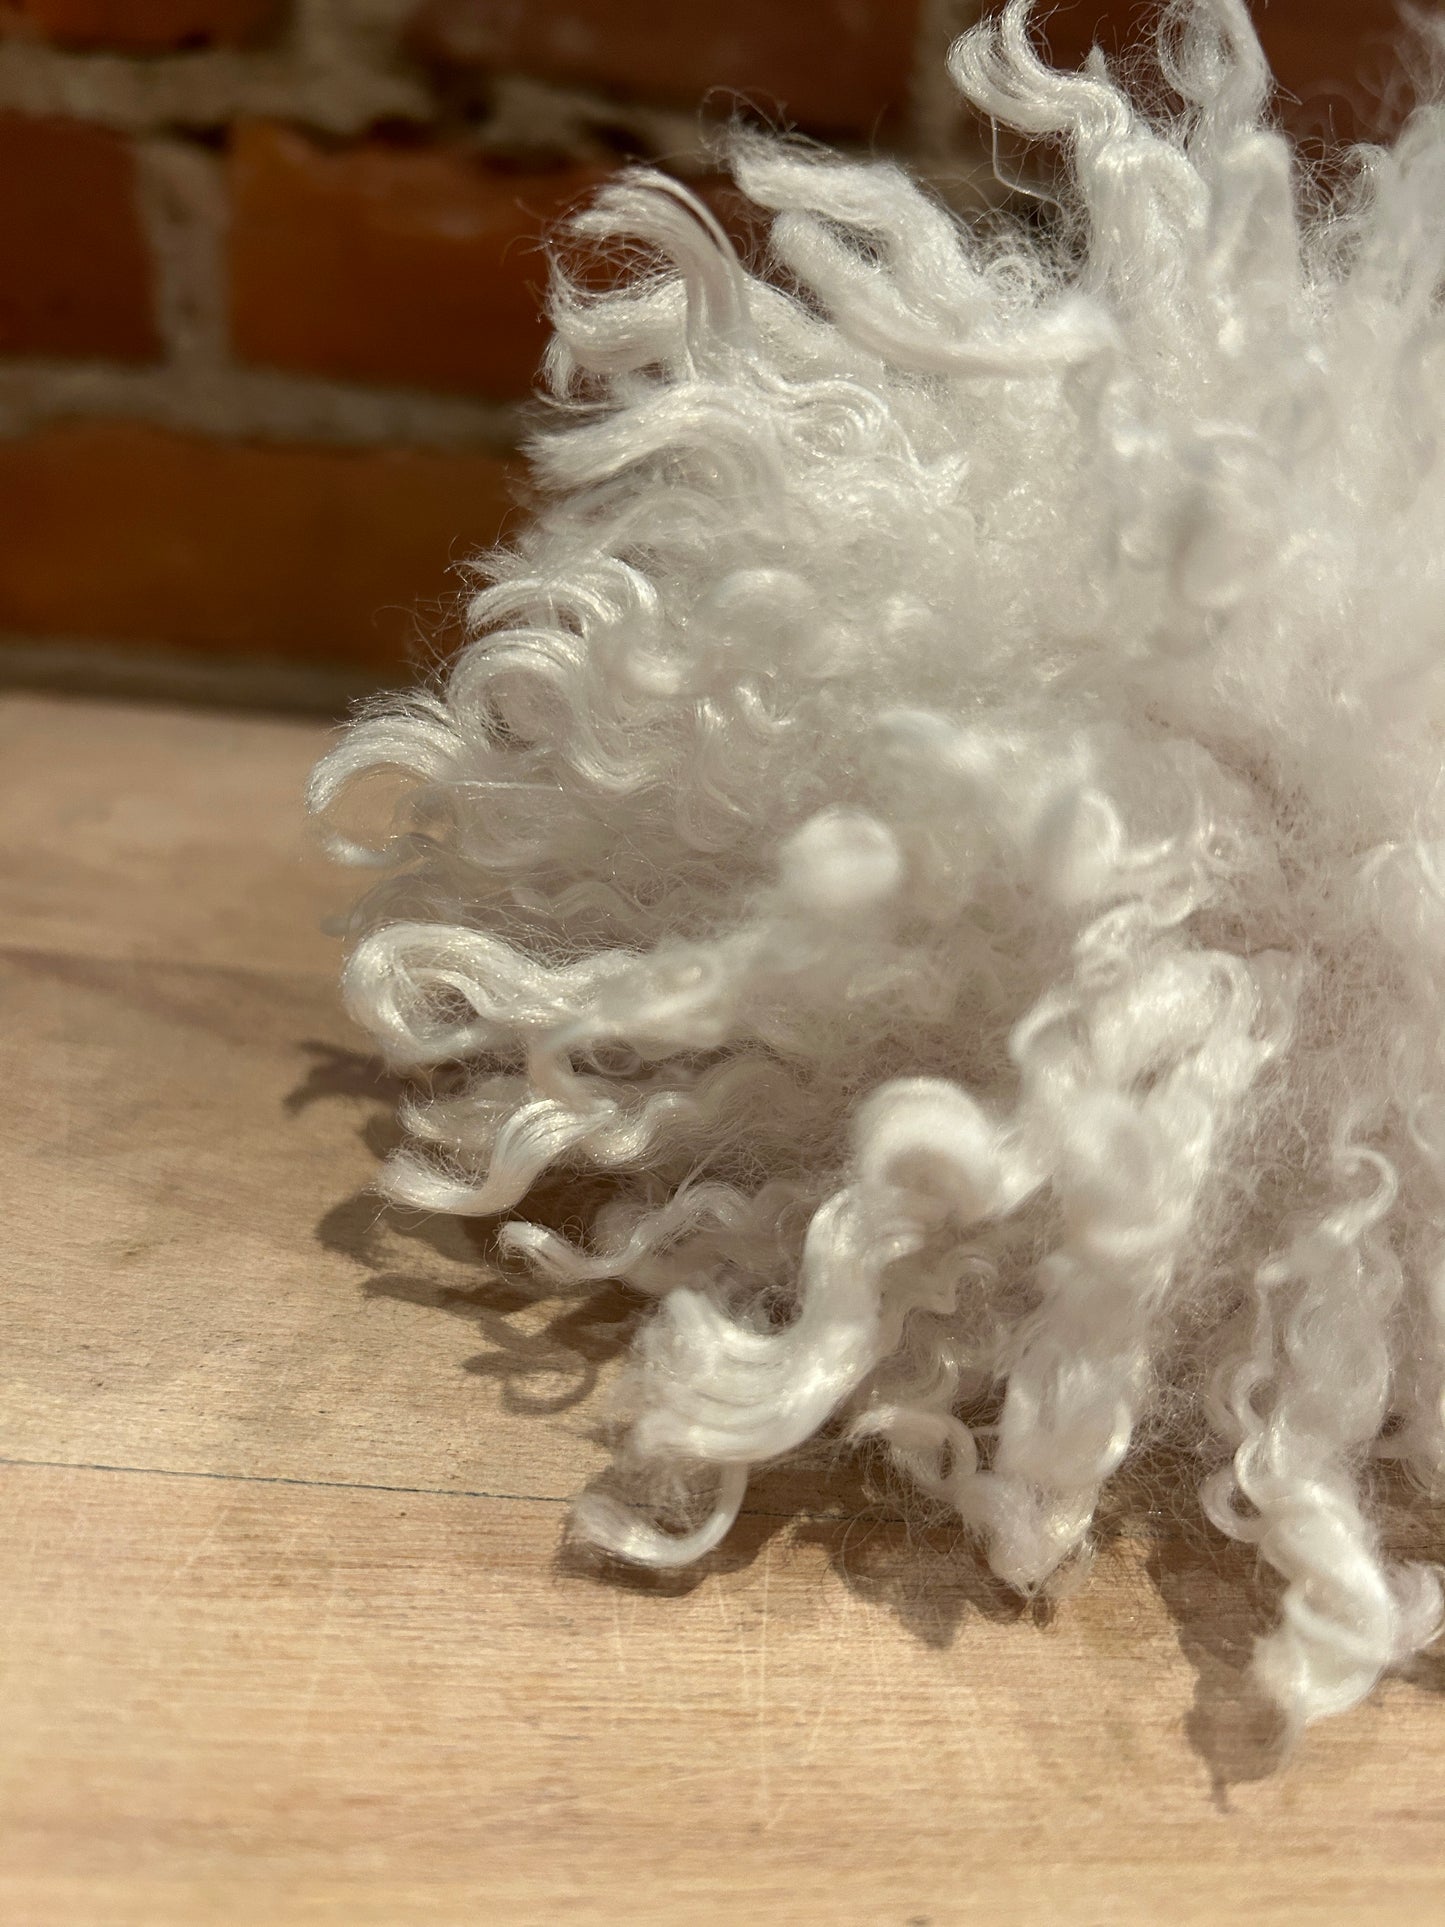 Winter White Faux Fur Curly Pom, 5 Inch